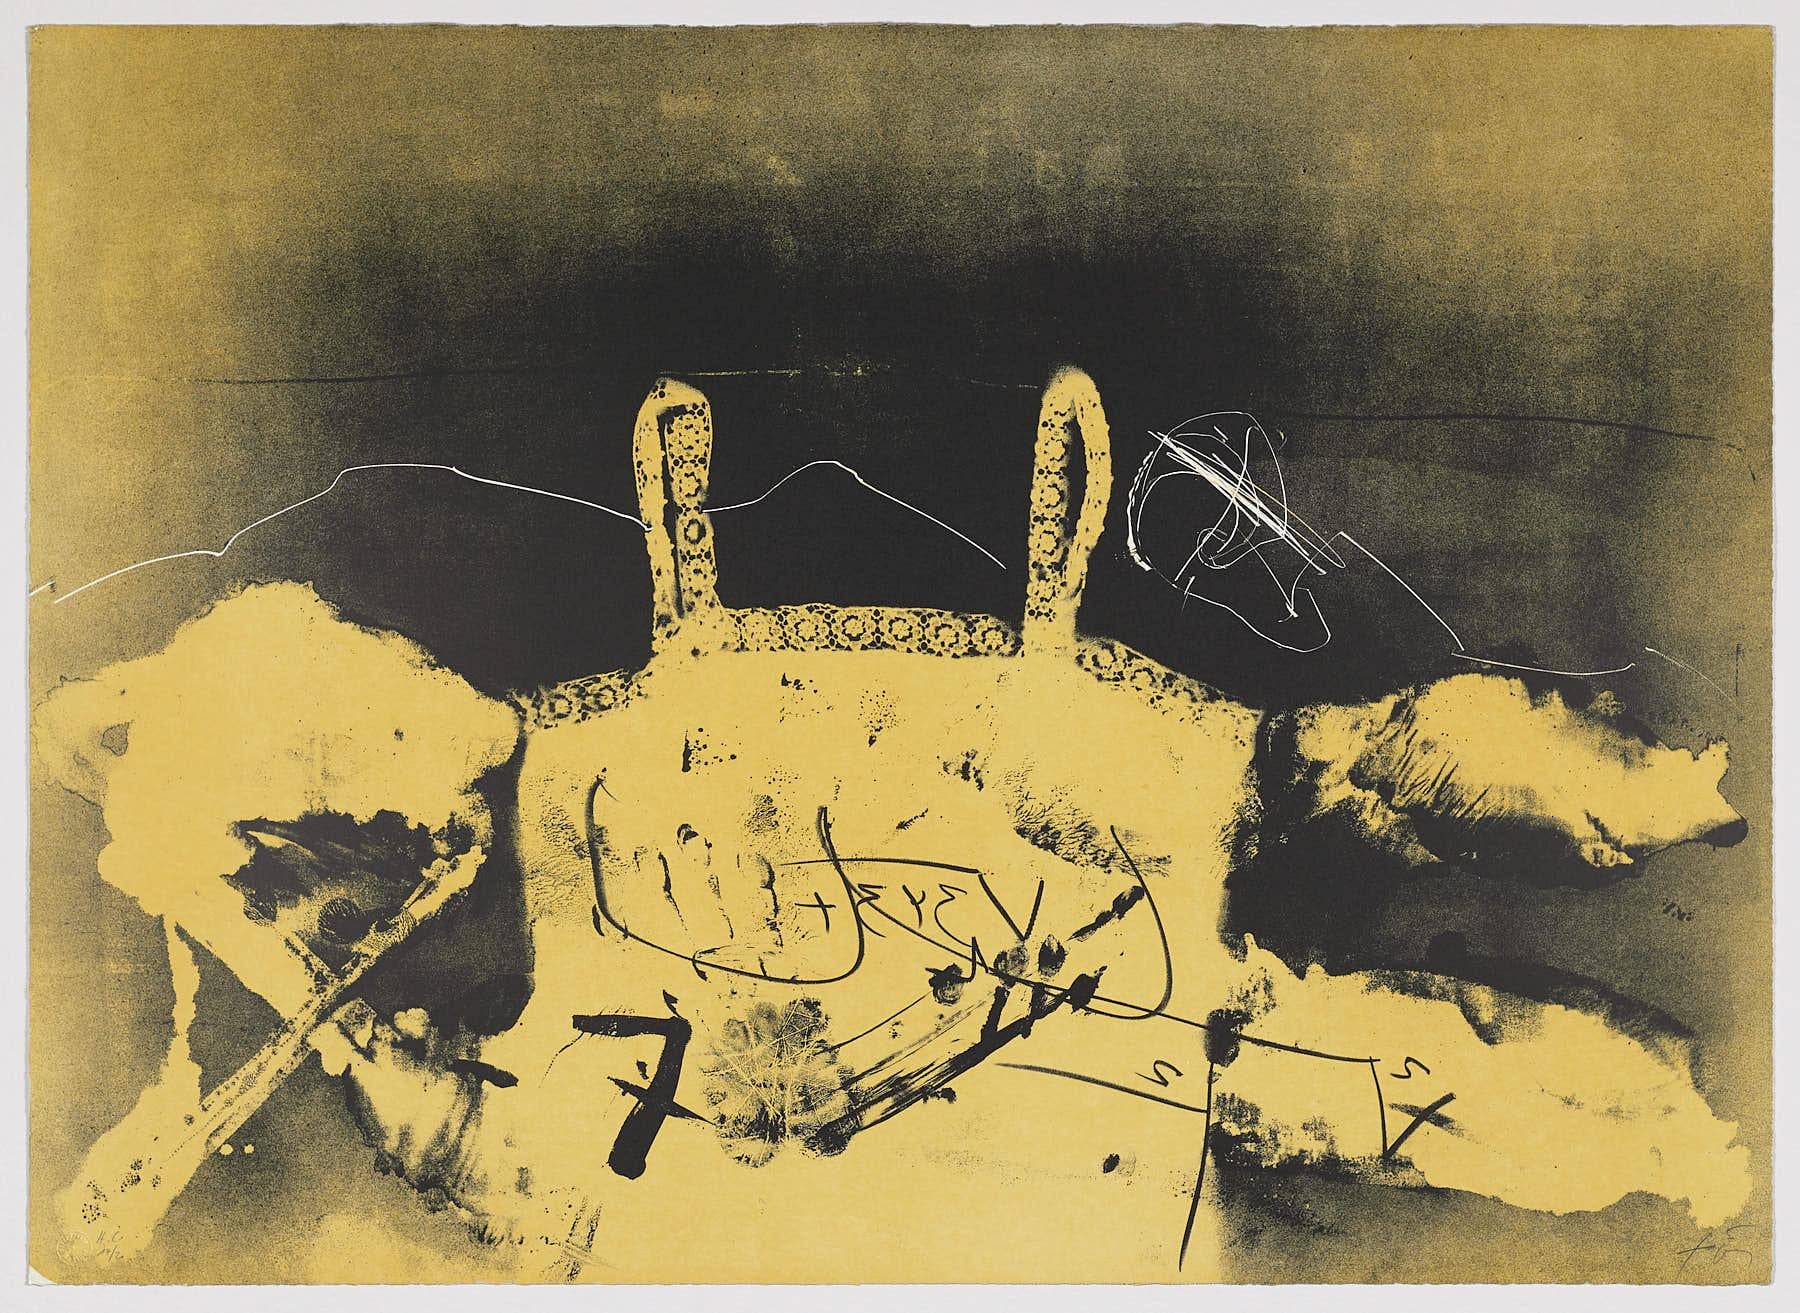 Spanish Artist signed limited edition original art print numbered lithograph - Print by Antoni Tàpies